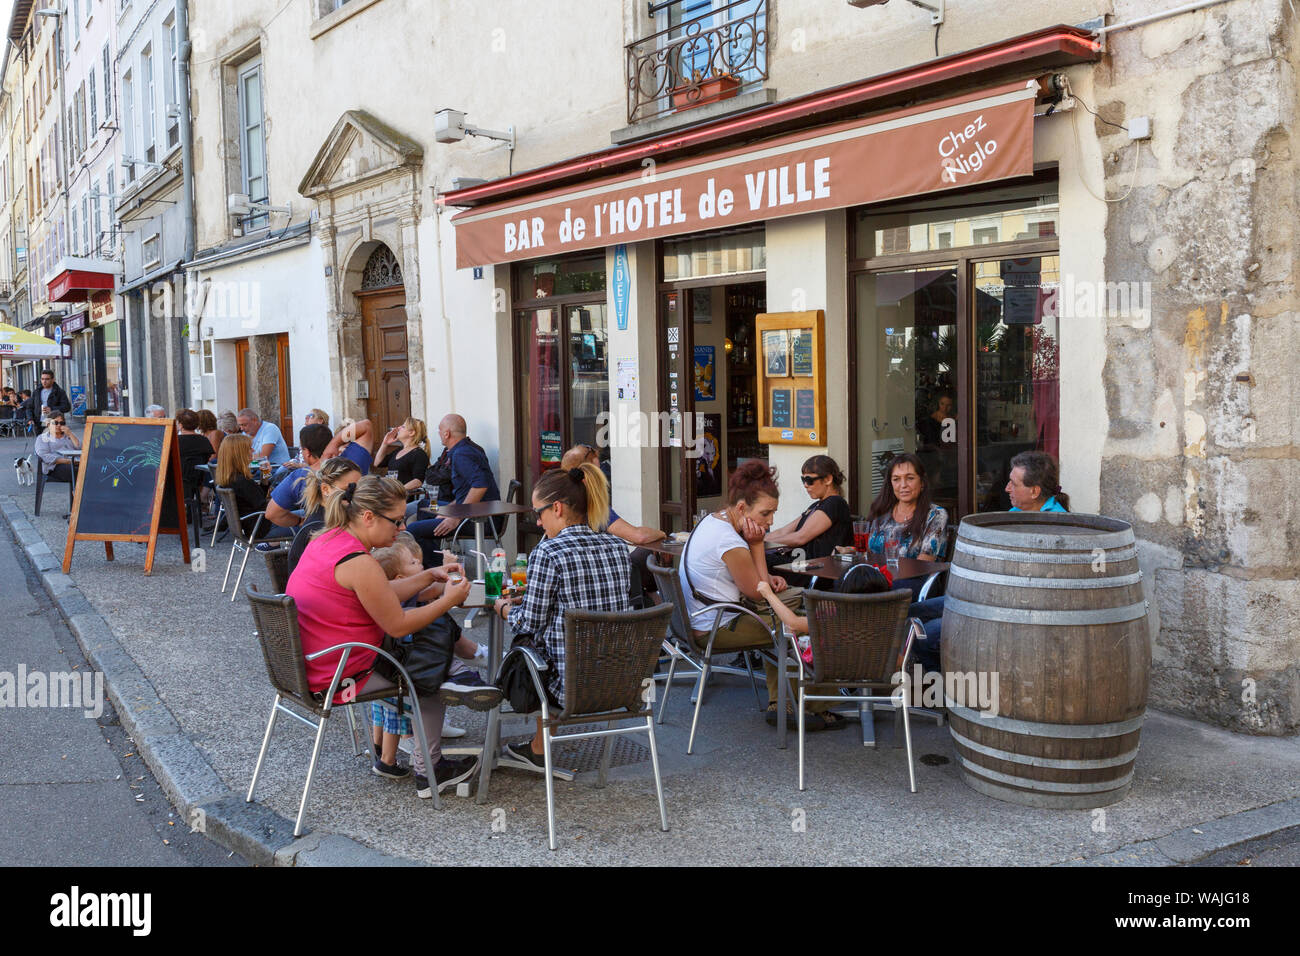 Al Fresco dining. Vienne, France. (Editorial Use Only) Stock Photo